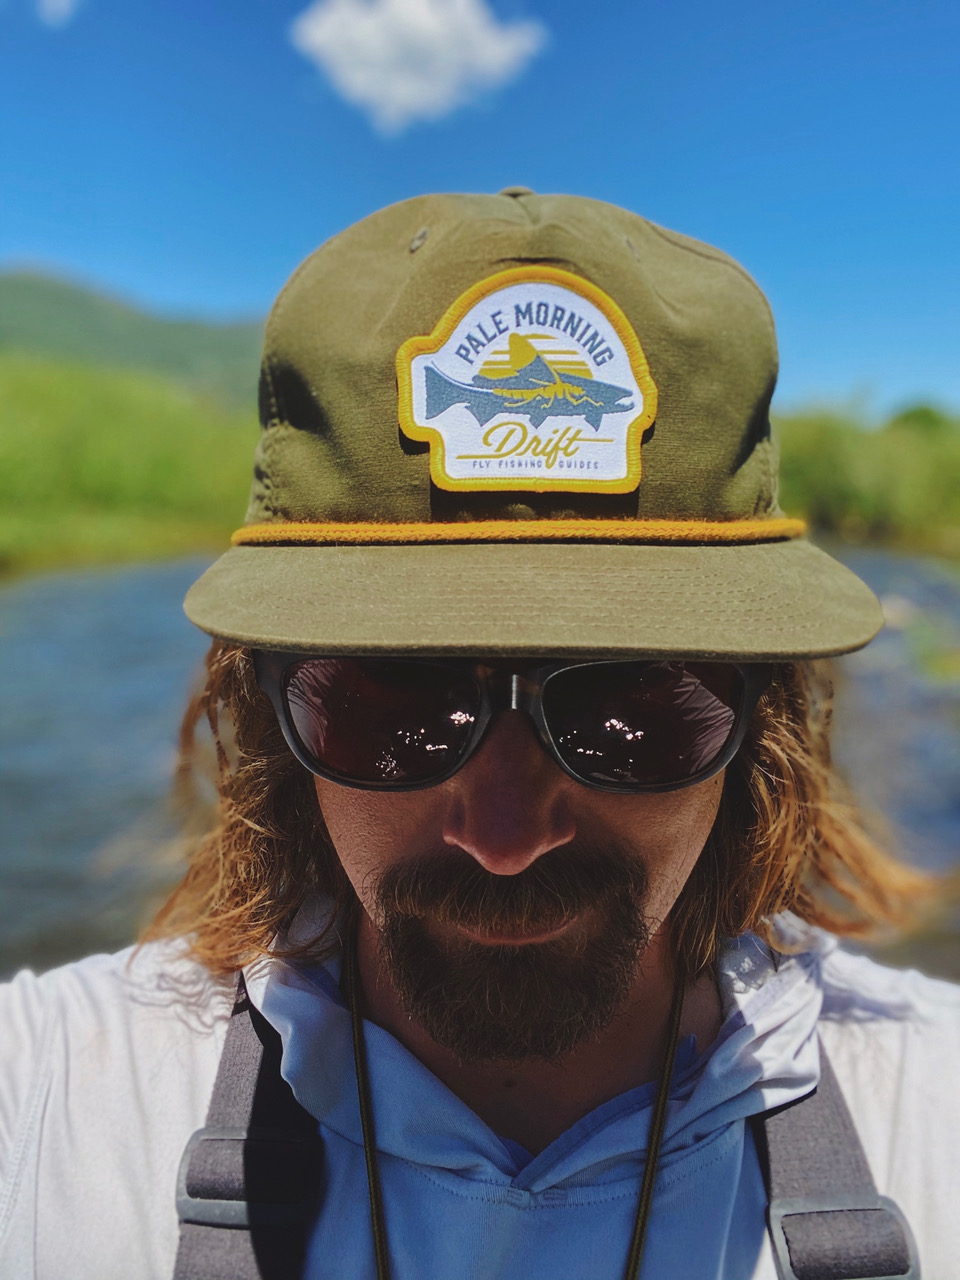 Fly Fishing Headwear – Hats and Caps